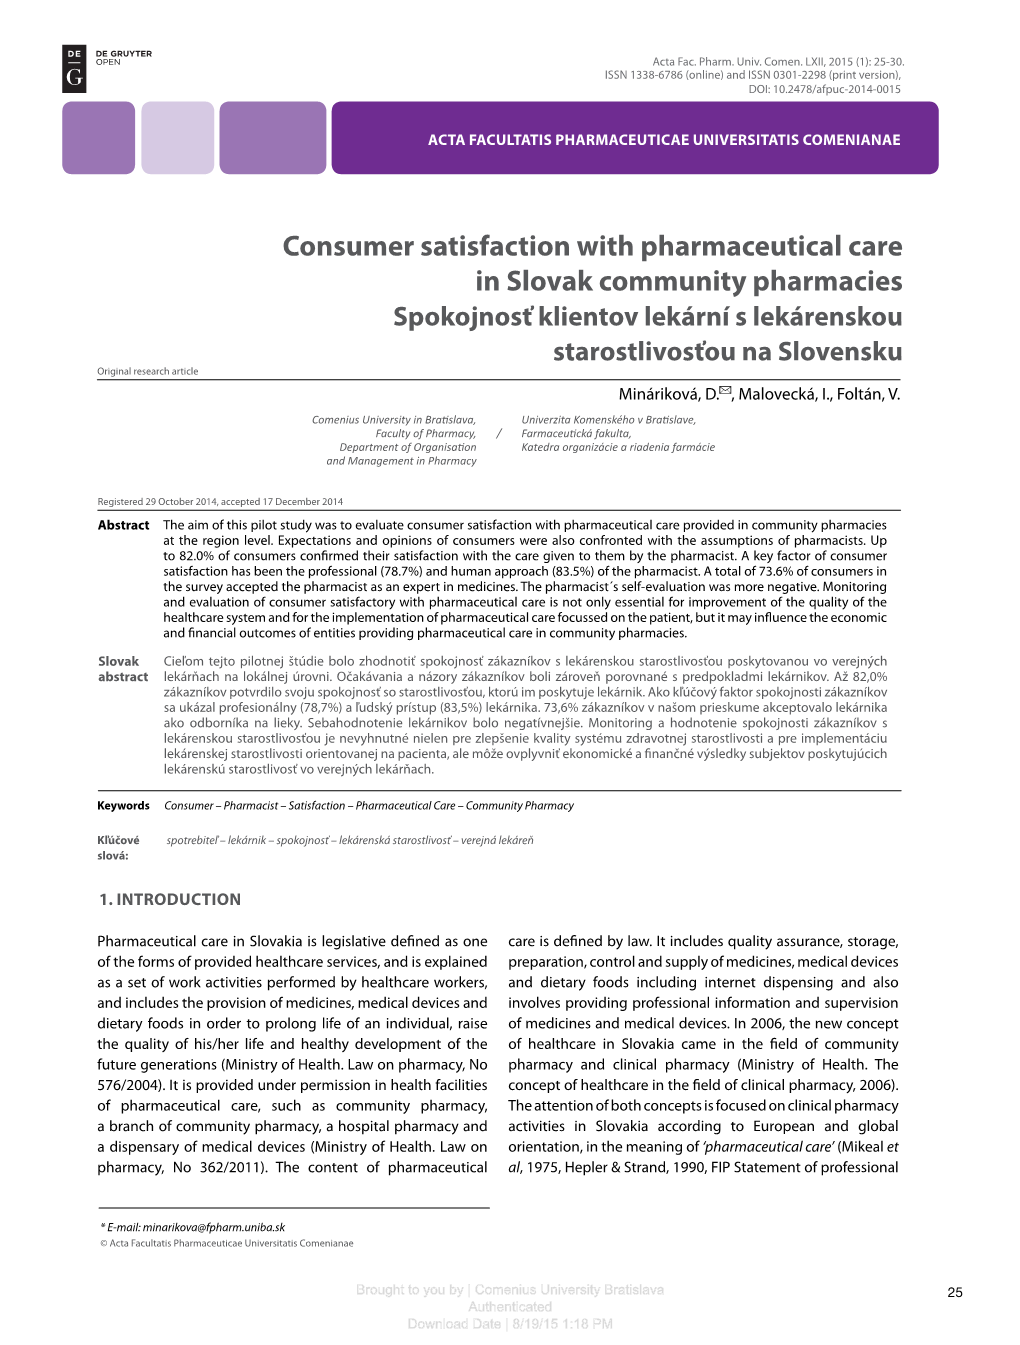 Consumer Satisfaction with Pharmaceutical Care in Slovak Community Pharmacies